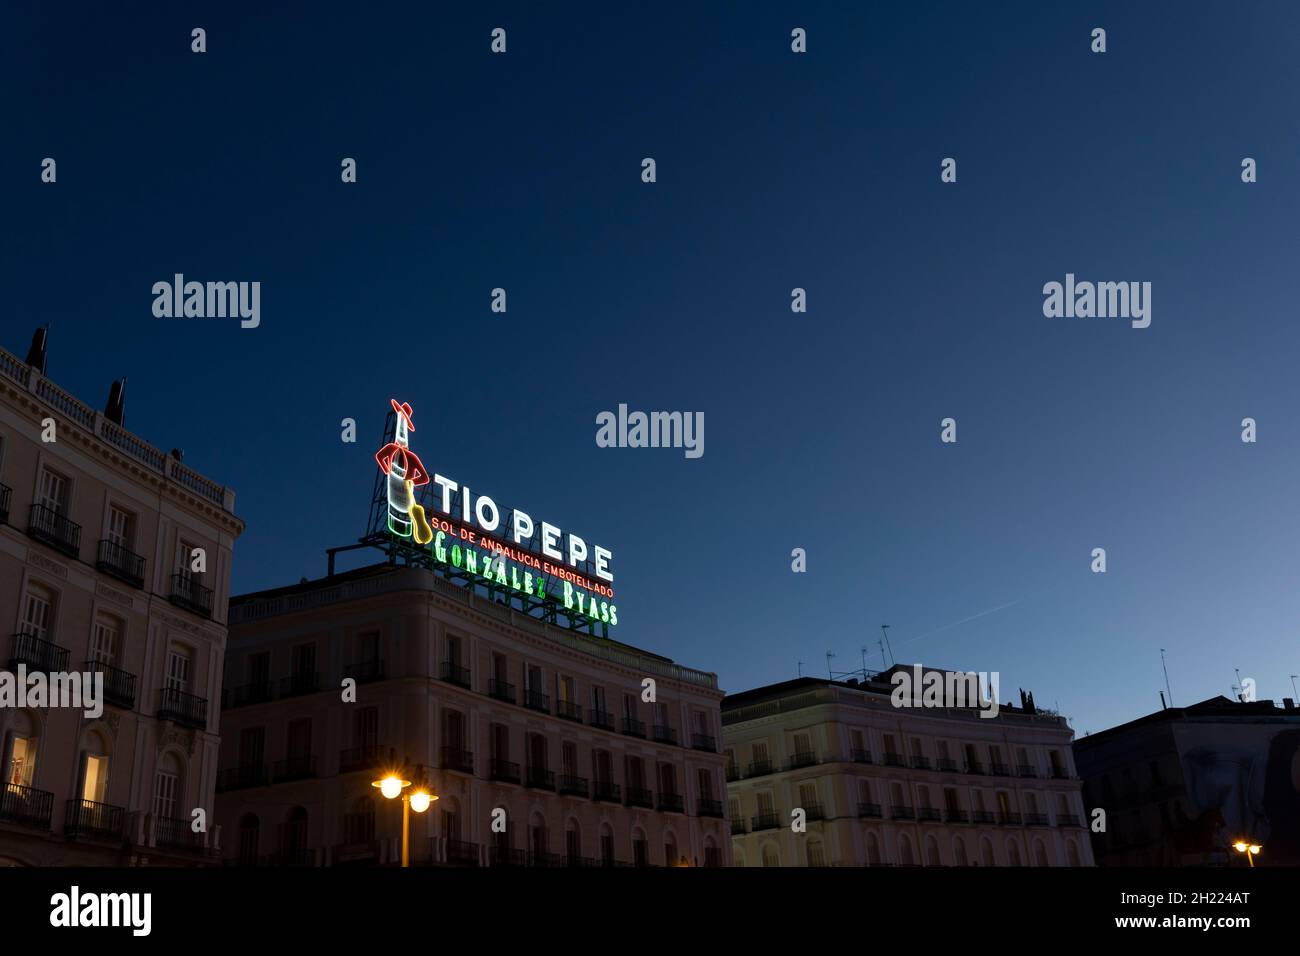 The landmark Tío Pepe sign, an advertisement for Tío Pepe sherry, illuminates the Puerta del Sol at sunset in Madrid, Spain. Stock Photo